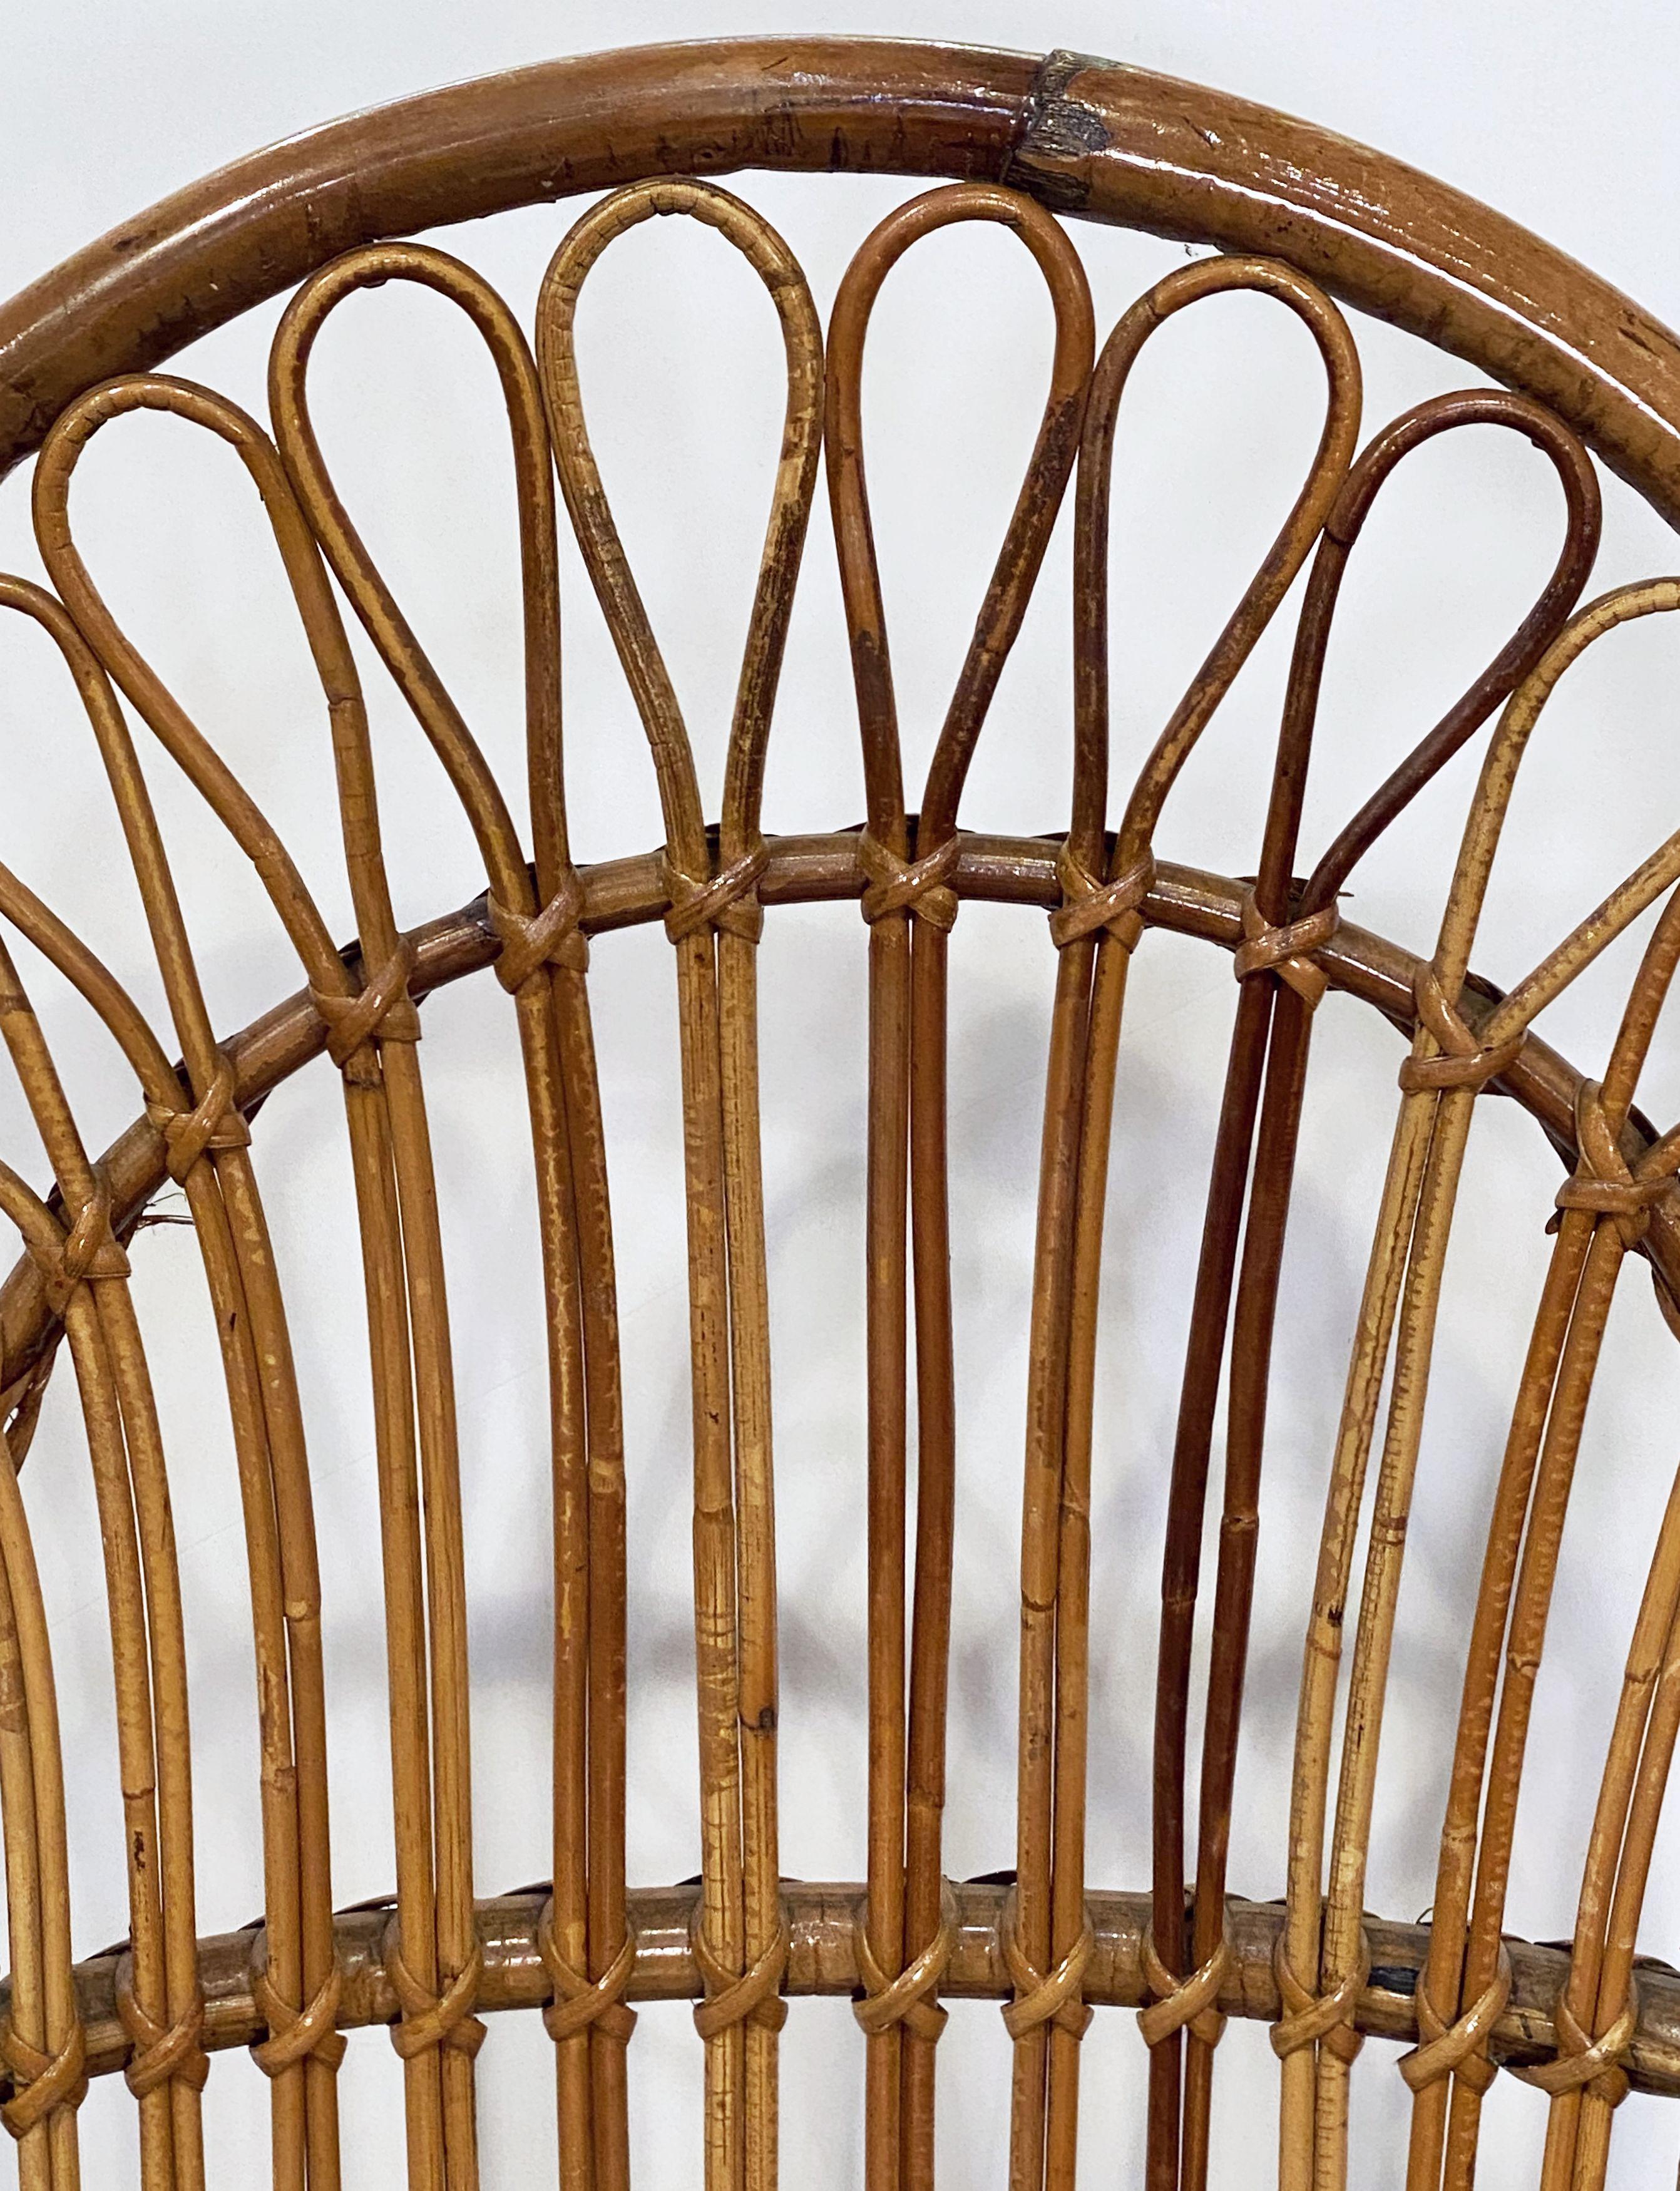 Italian Fan-Backed Chair of Rattan and Bamboo from the Mid-20th Century For Sale 13